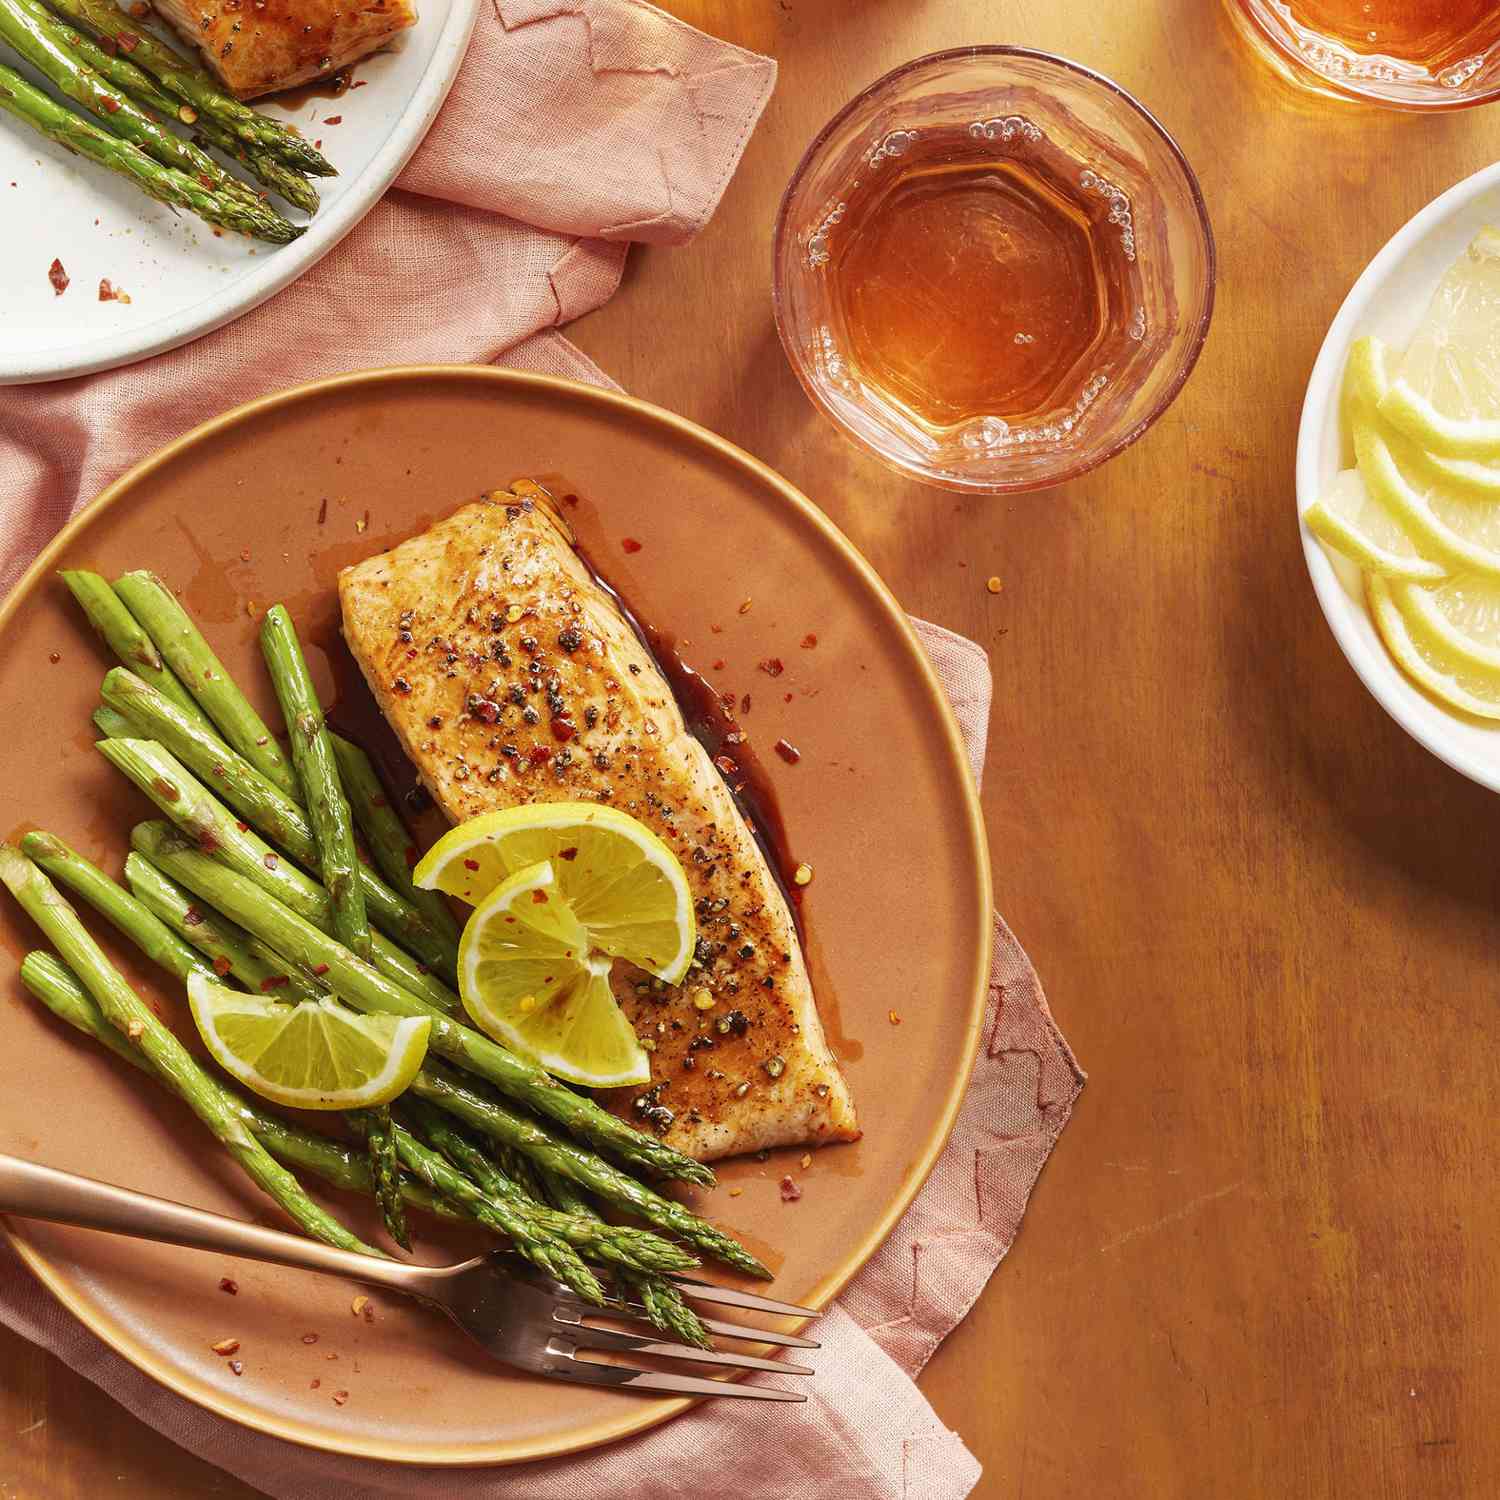 Soy and Honey-Glazed Salmon filet served with a side of roasted asparagus topped with think lemon wedges and red pepper flakes